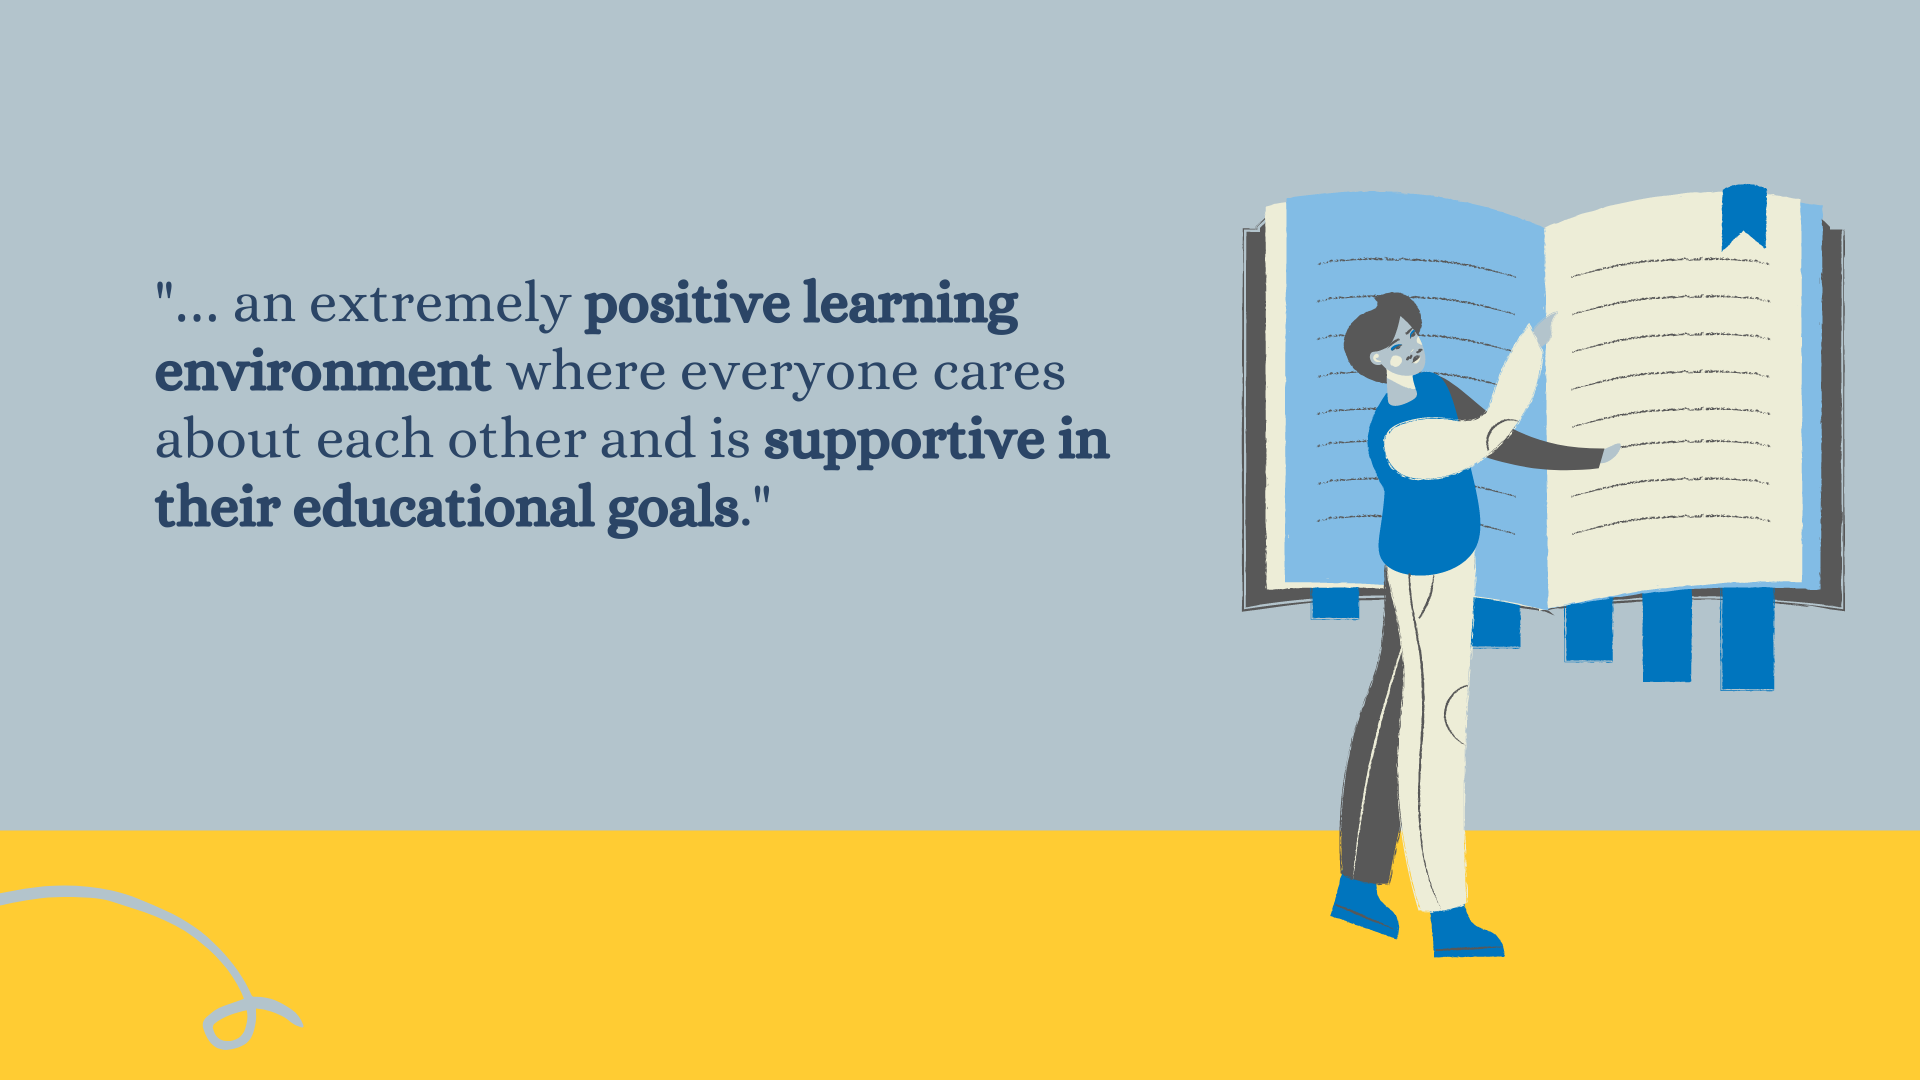 Image with the text "… an extremely positive learning environment where everyone cares about each other and is supportive in their educational goals."